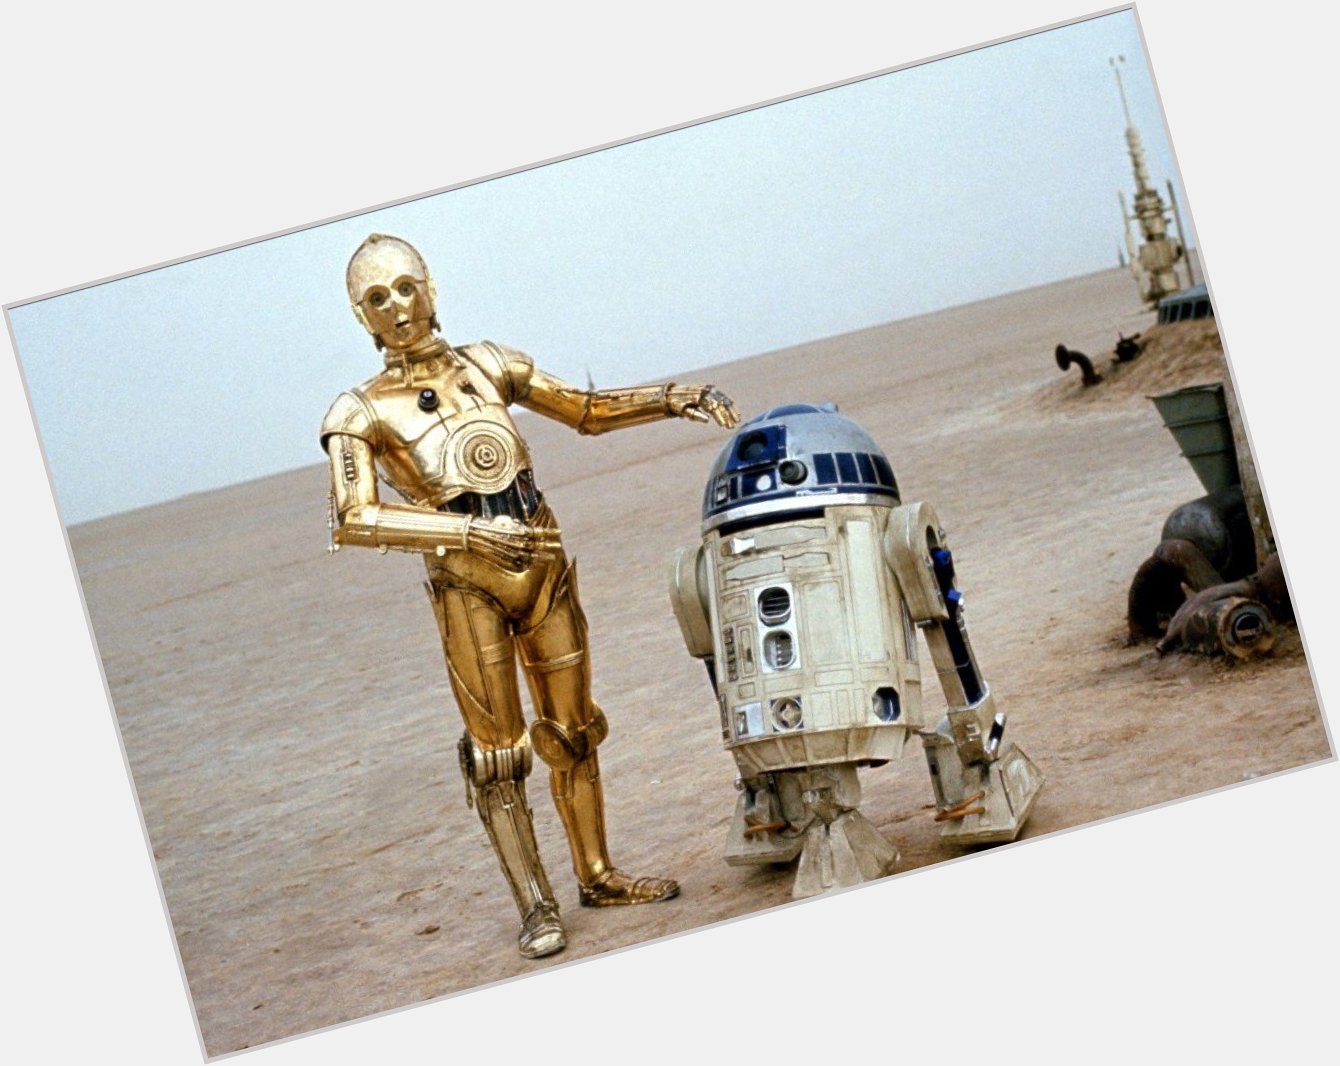 Happy birthday Anthony Daniels. May the force be with you!  